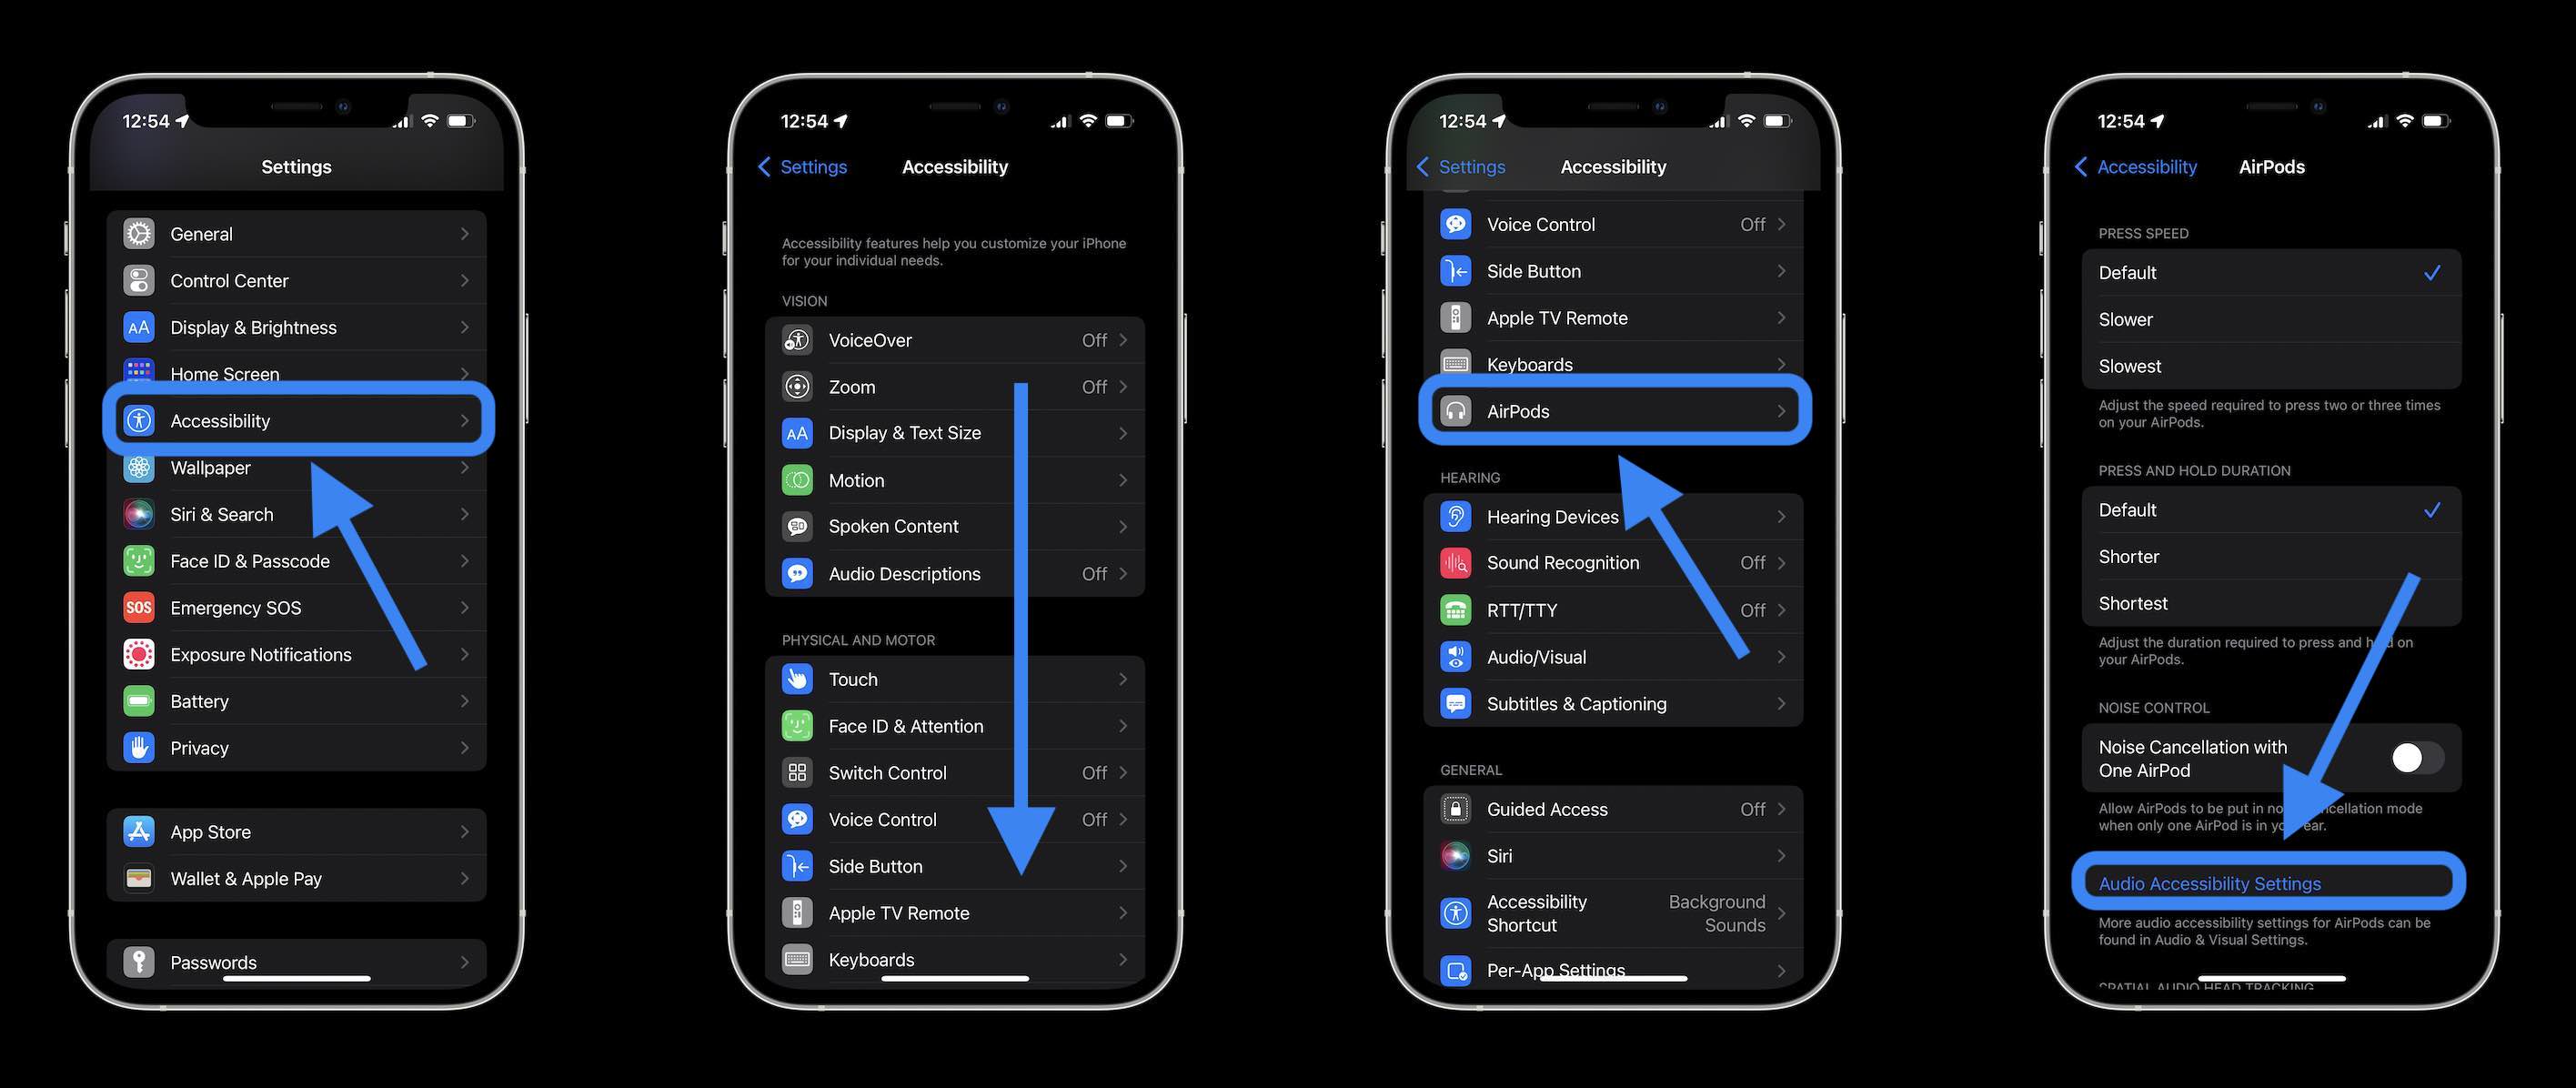 Turn on AirPods Pro Conversation Boost - Settings > Accessibility > AirPods > Audio Accessibility Settings